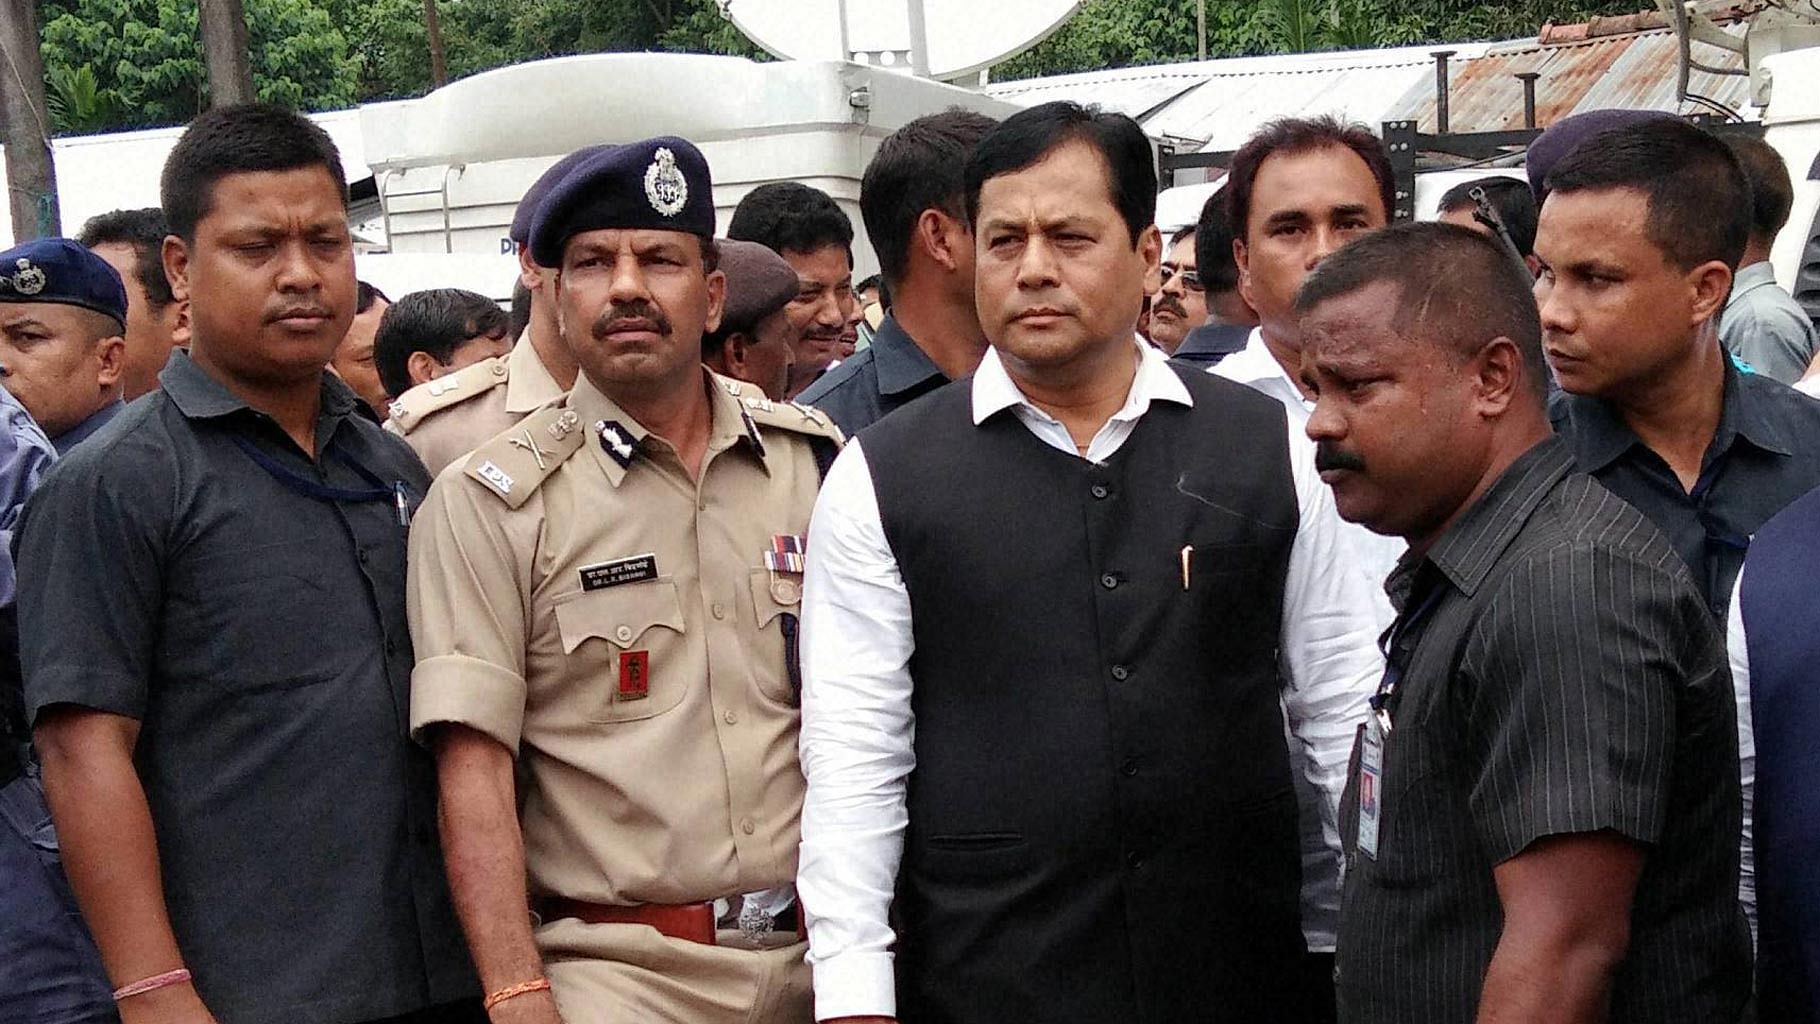 Assam Chief Minister Sarbananda Sonowal inspects the Balajan Tinali market that was attacked by NDFB (S) militant, in Kokrajhar district of Assam on Sunday, 7 August 2016. (Photo: PTI)